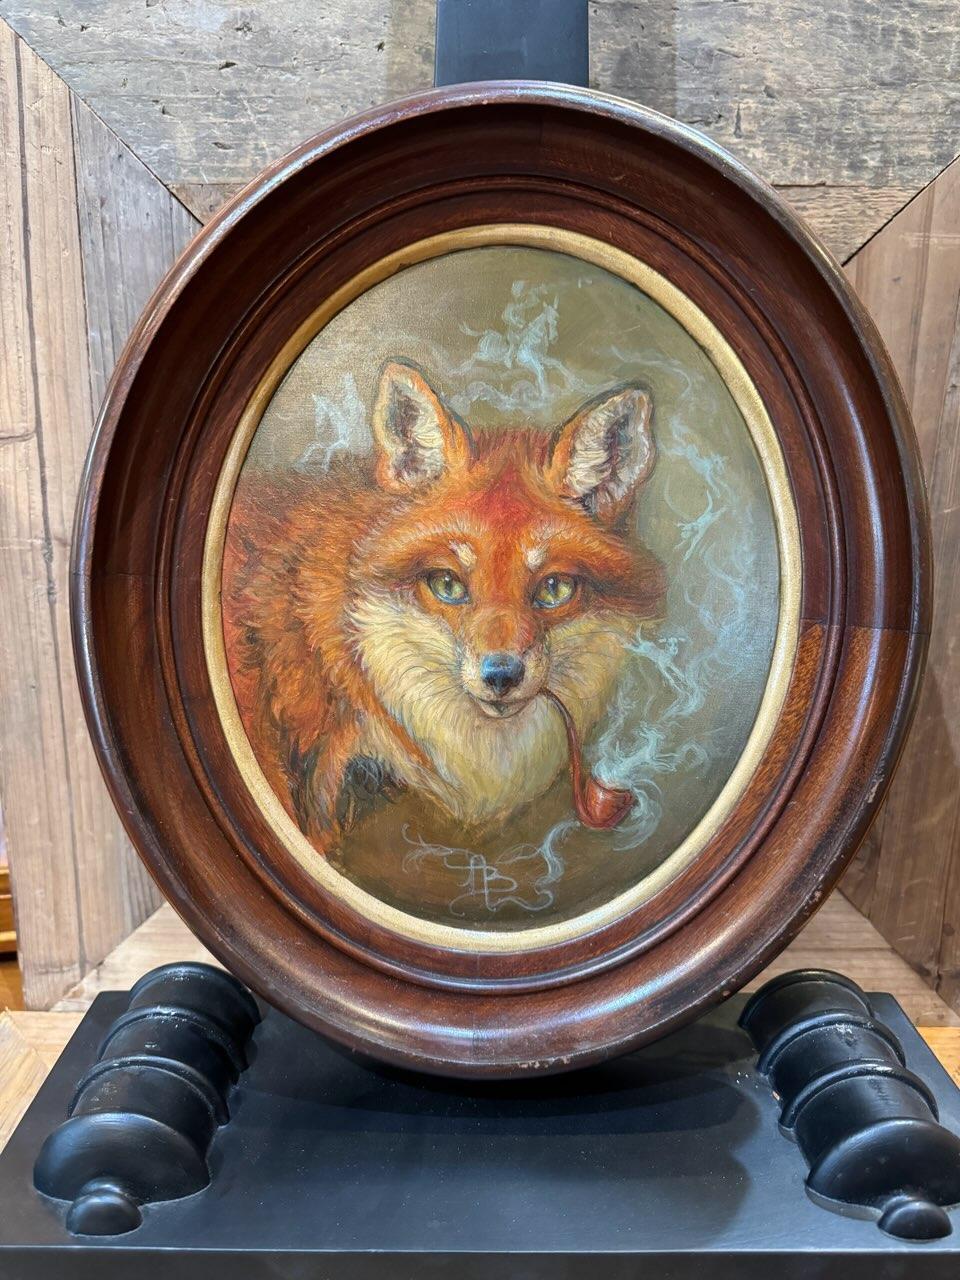 Contemporary Oil on Board Painting of Fox Smoking Pipe in Antique Frame by Anthony Barham